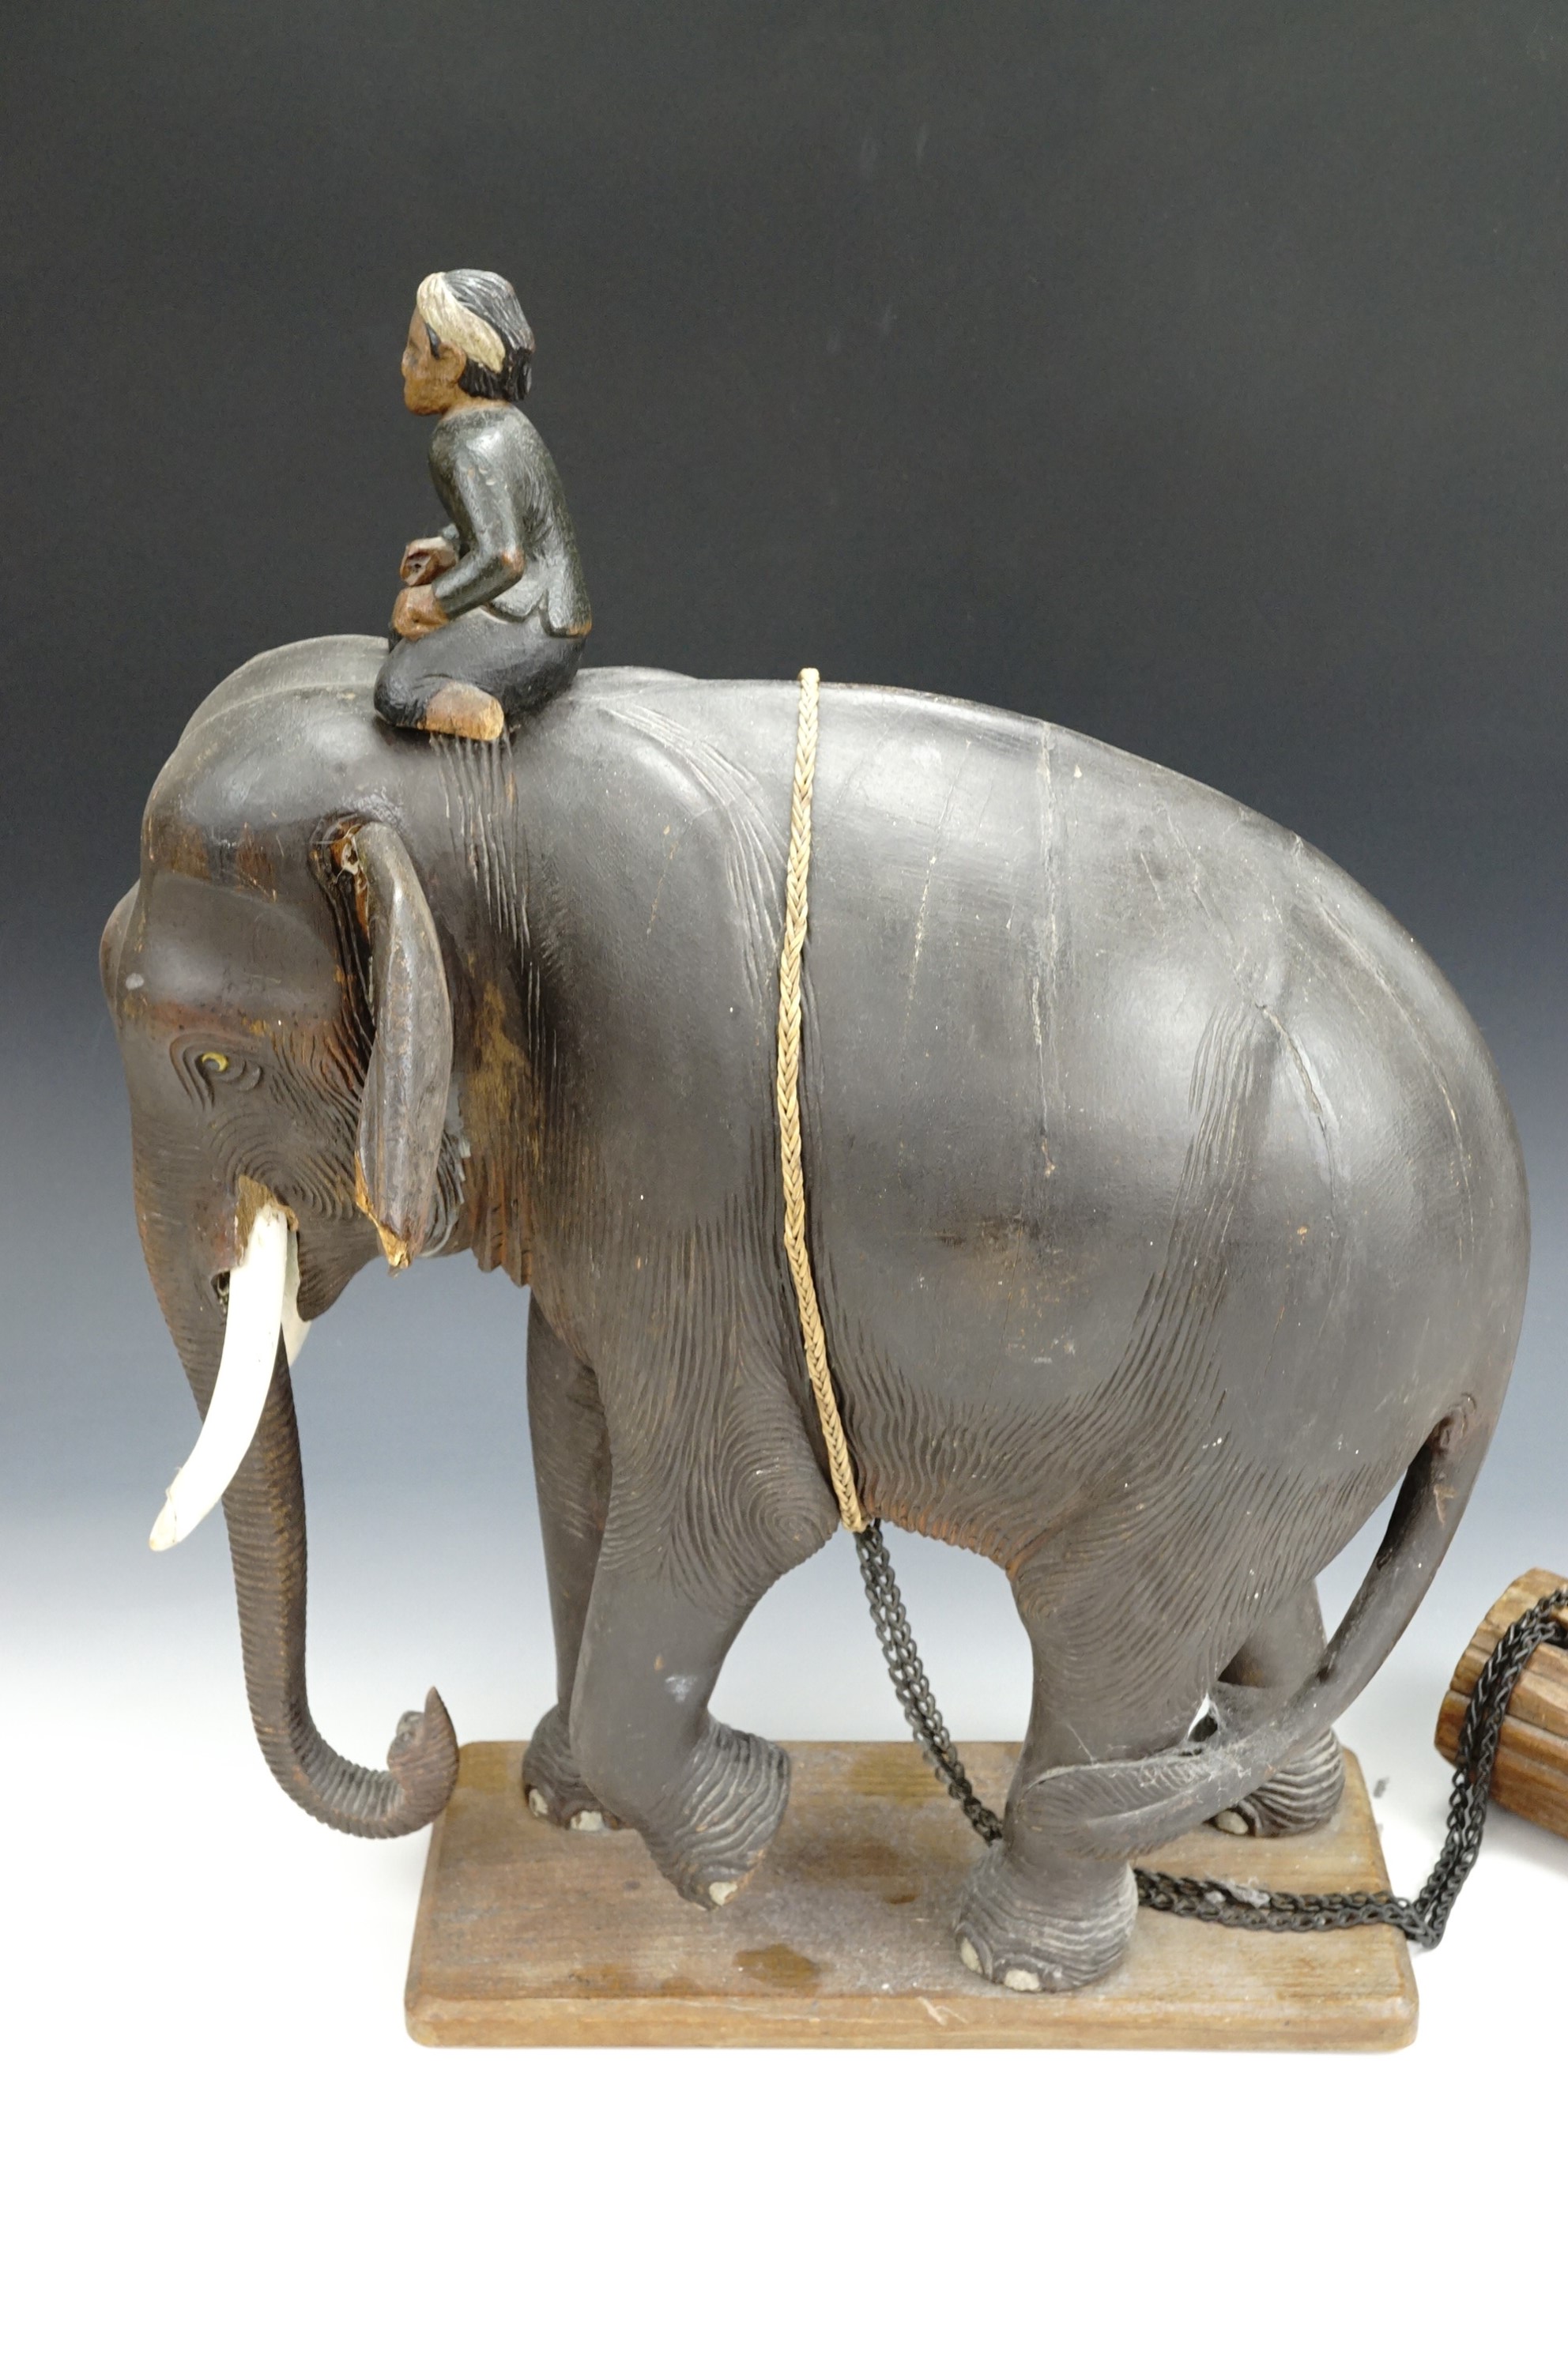 A 1930s Malayan elephant sculpture of carved wood, depicting a naturalistically modelled elephant